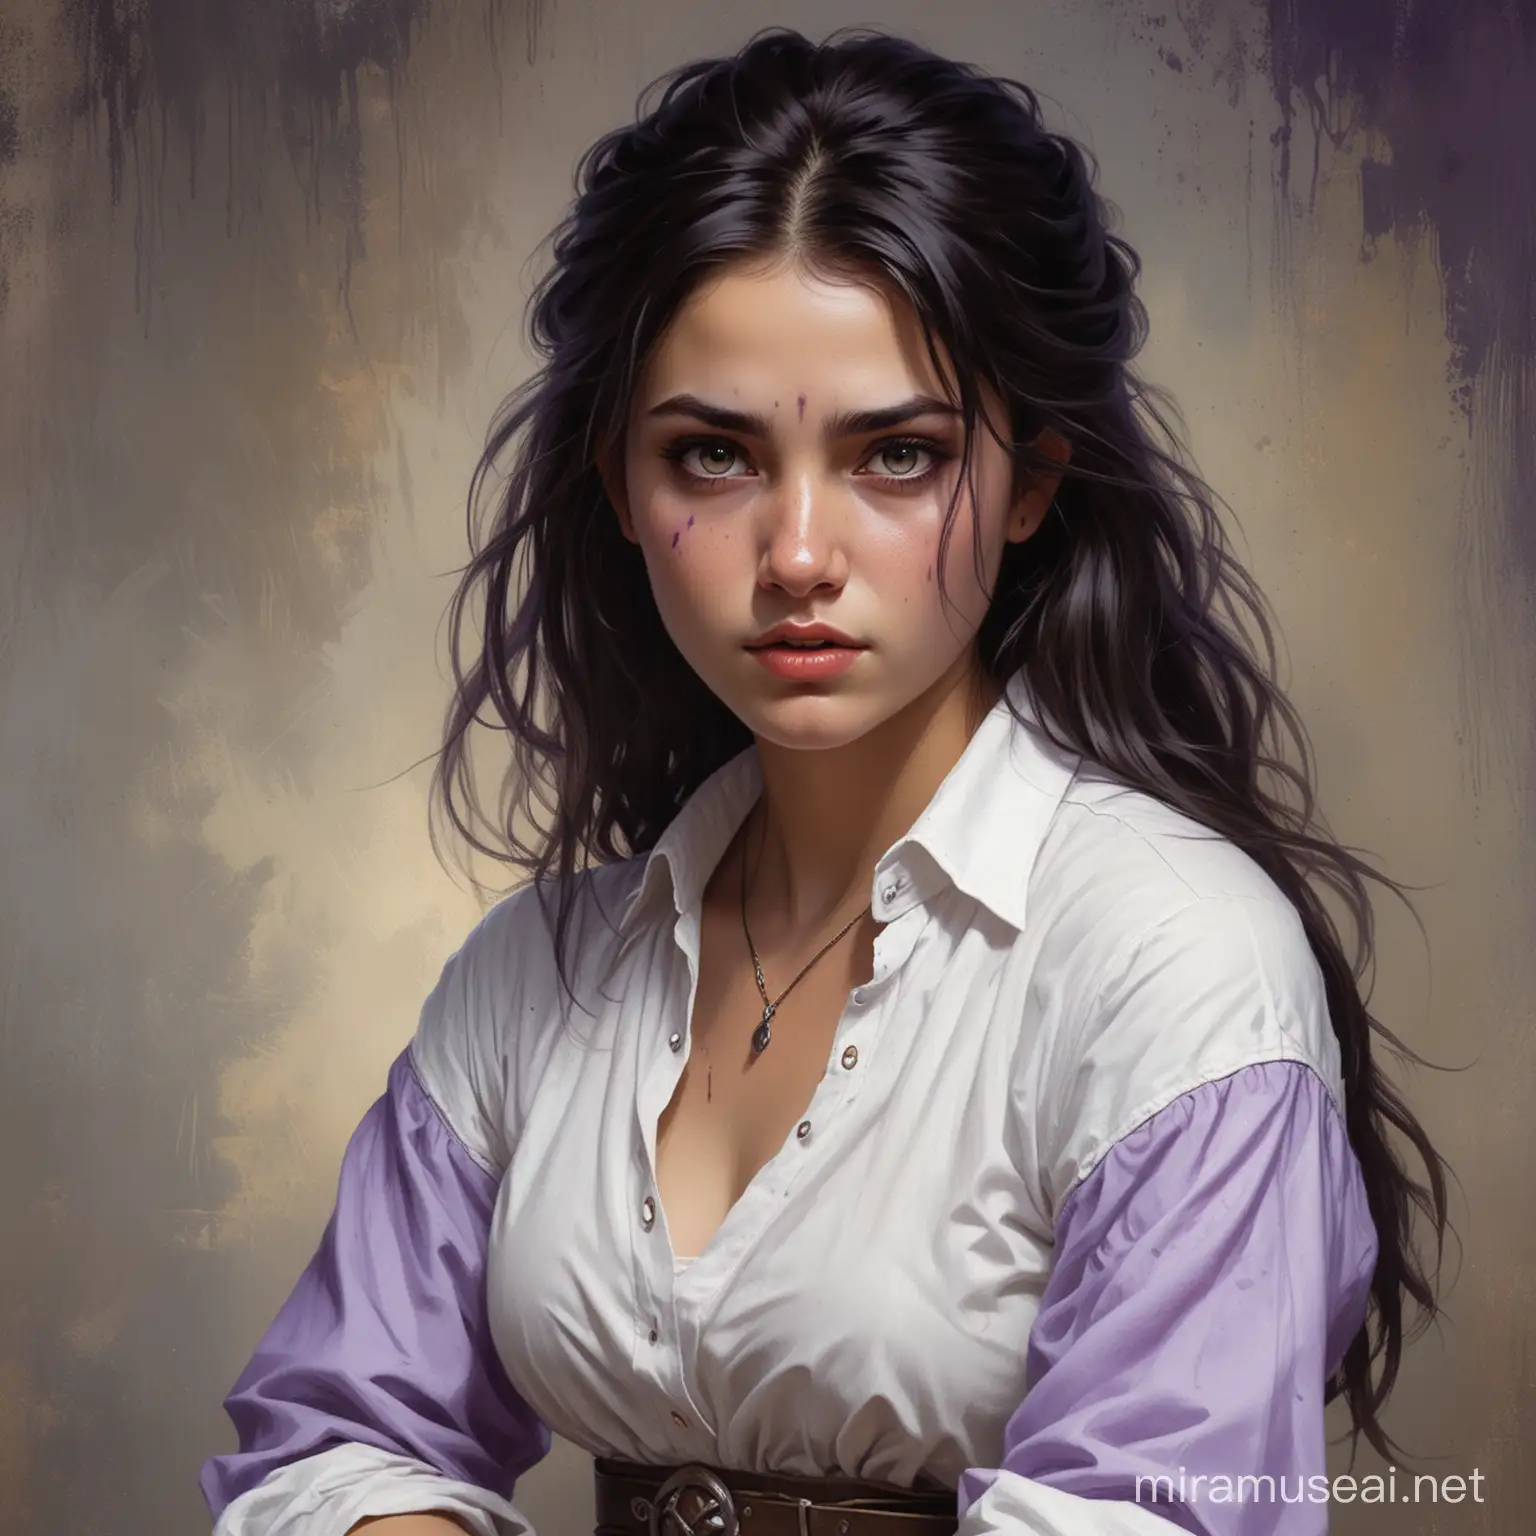 Feisty Young Herder Girl with a Mysterious Birthmark Medieval Fantasy Painting